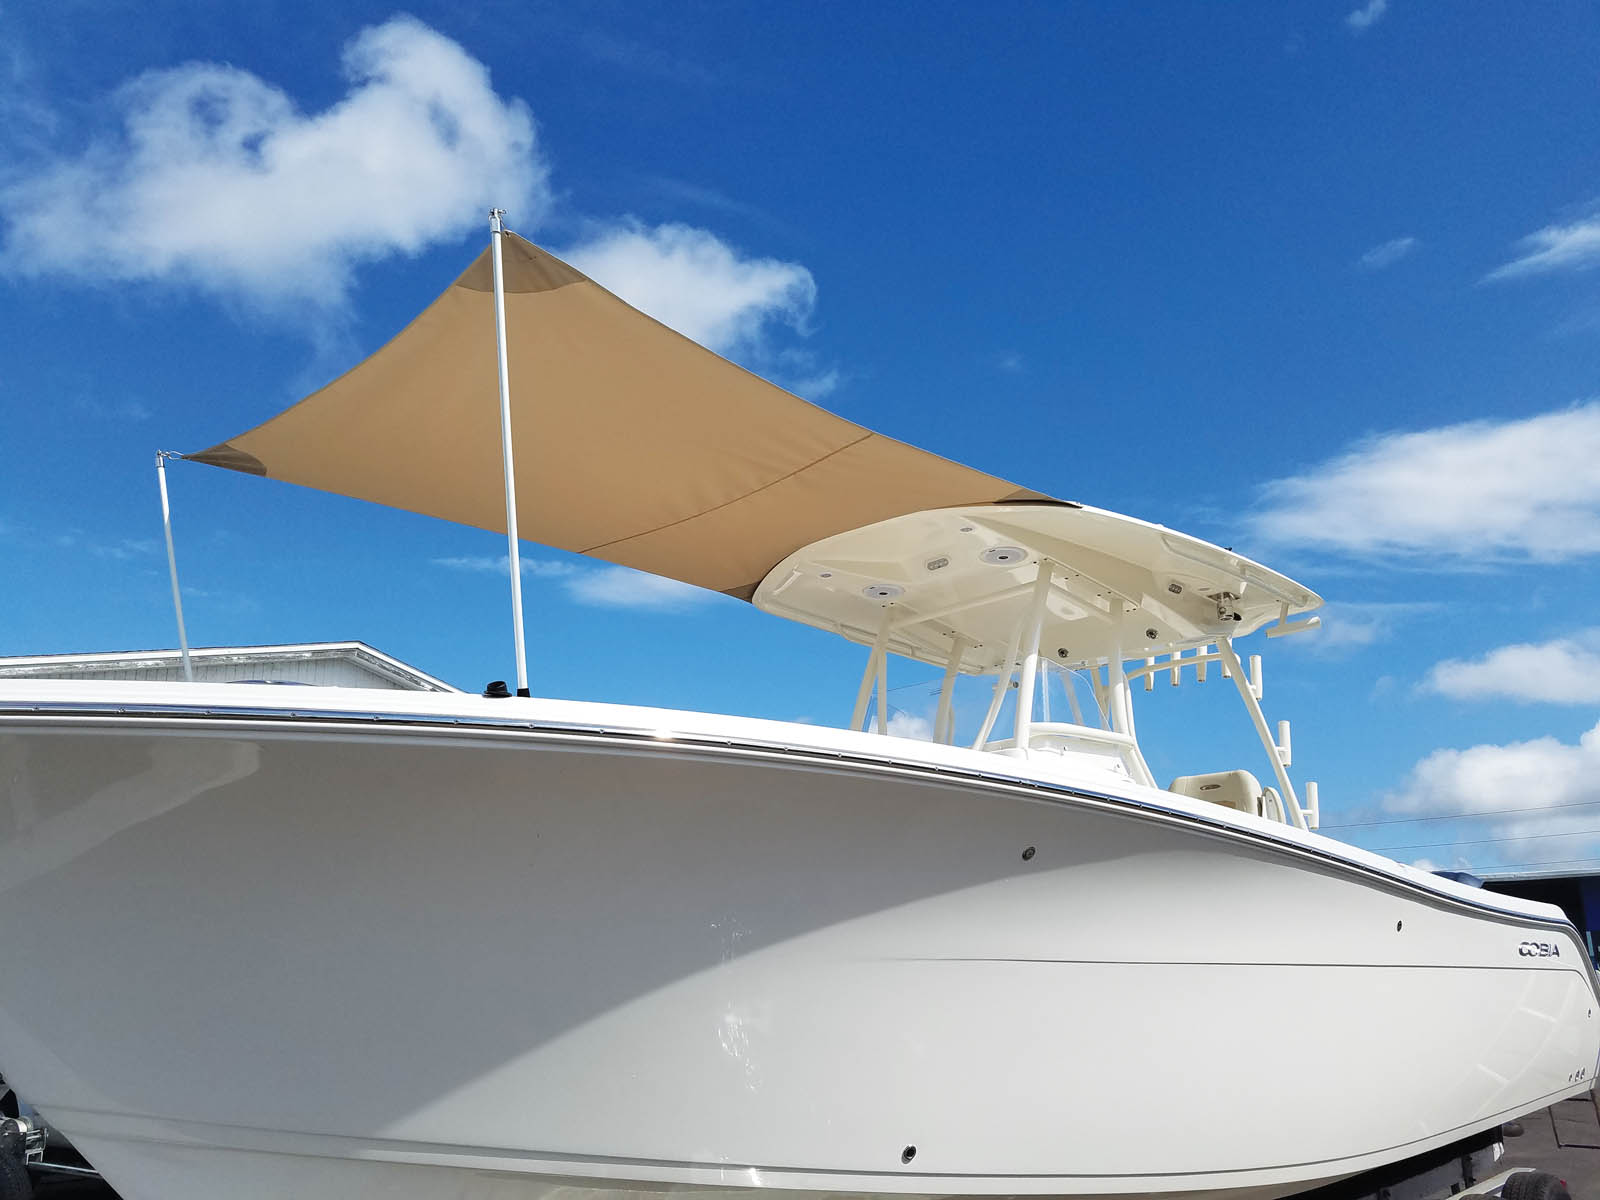 Boat Sunshade Canopy Bimini Top Boat Roof Cover 2/3/4 Beams with Zipper and Support Poles Sun-Proof and Waterproof Yacht Cover Oxford Cloth Qmm 